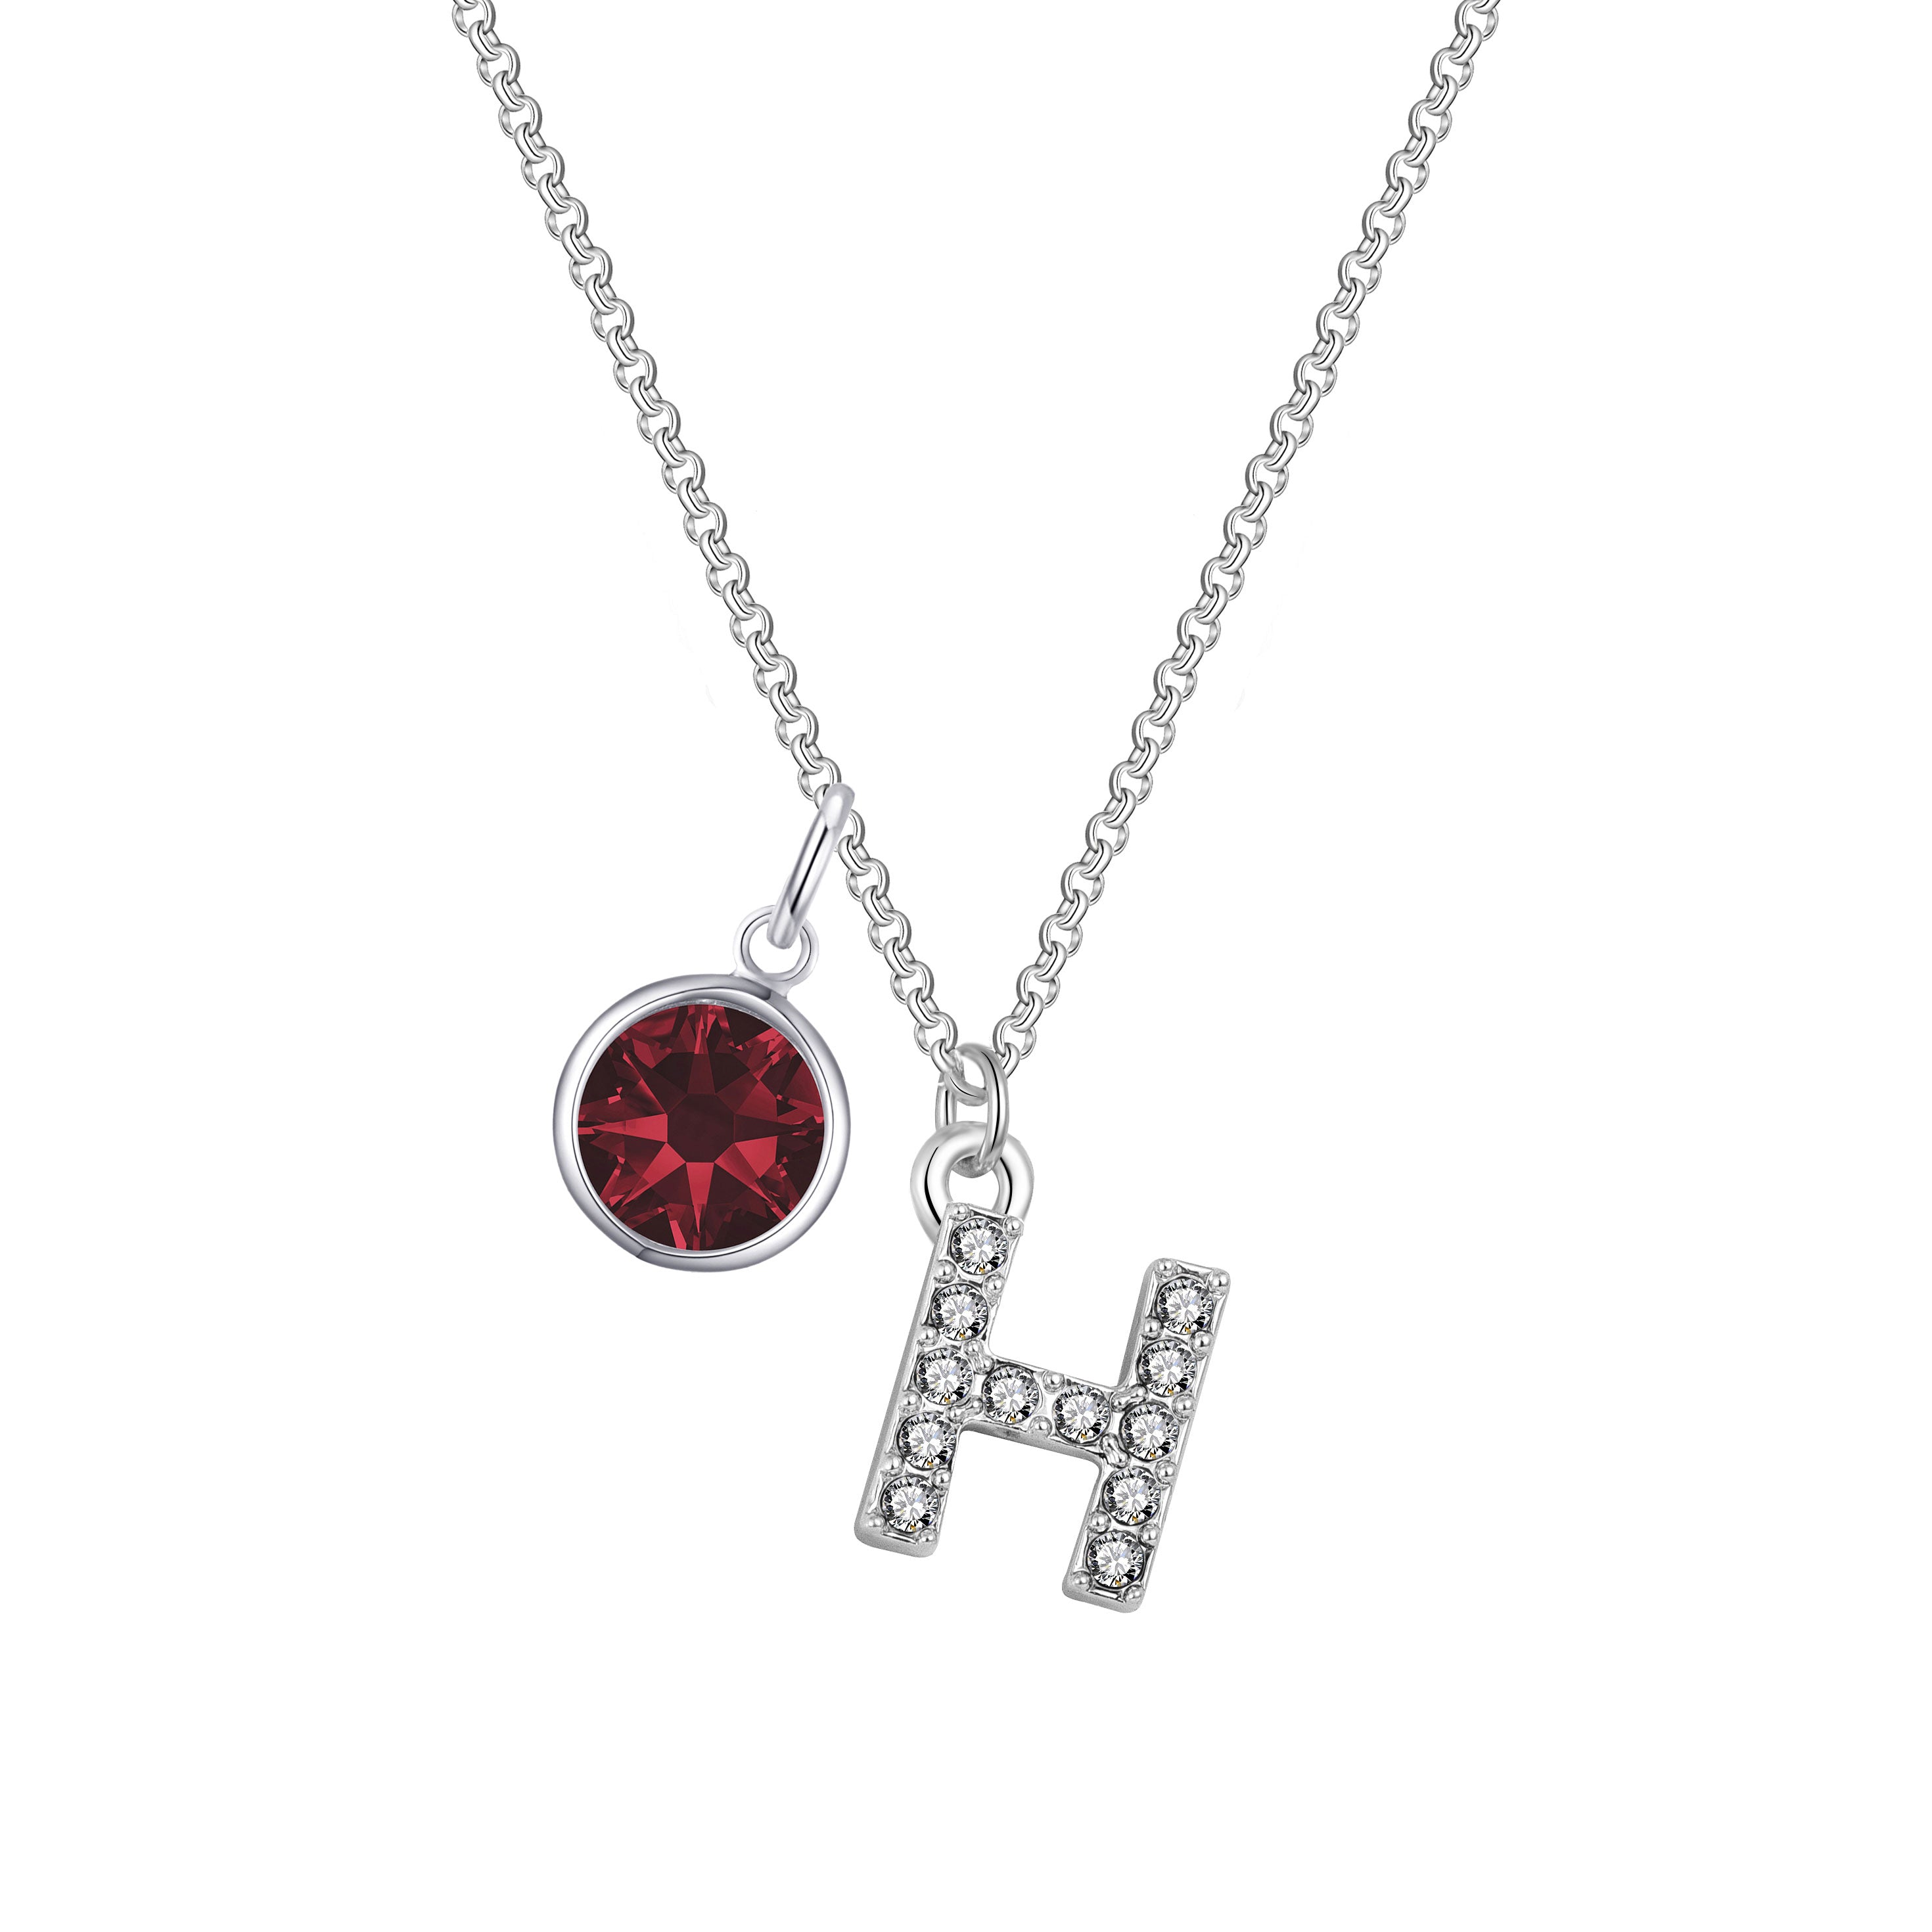 Pave Initial H Necklace with Birthstone Charm Created with Zircondia® Crystals